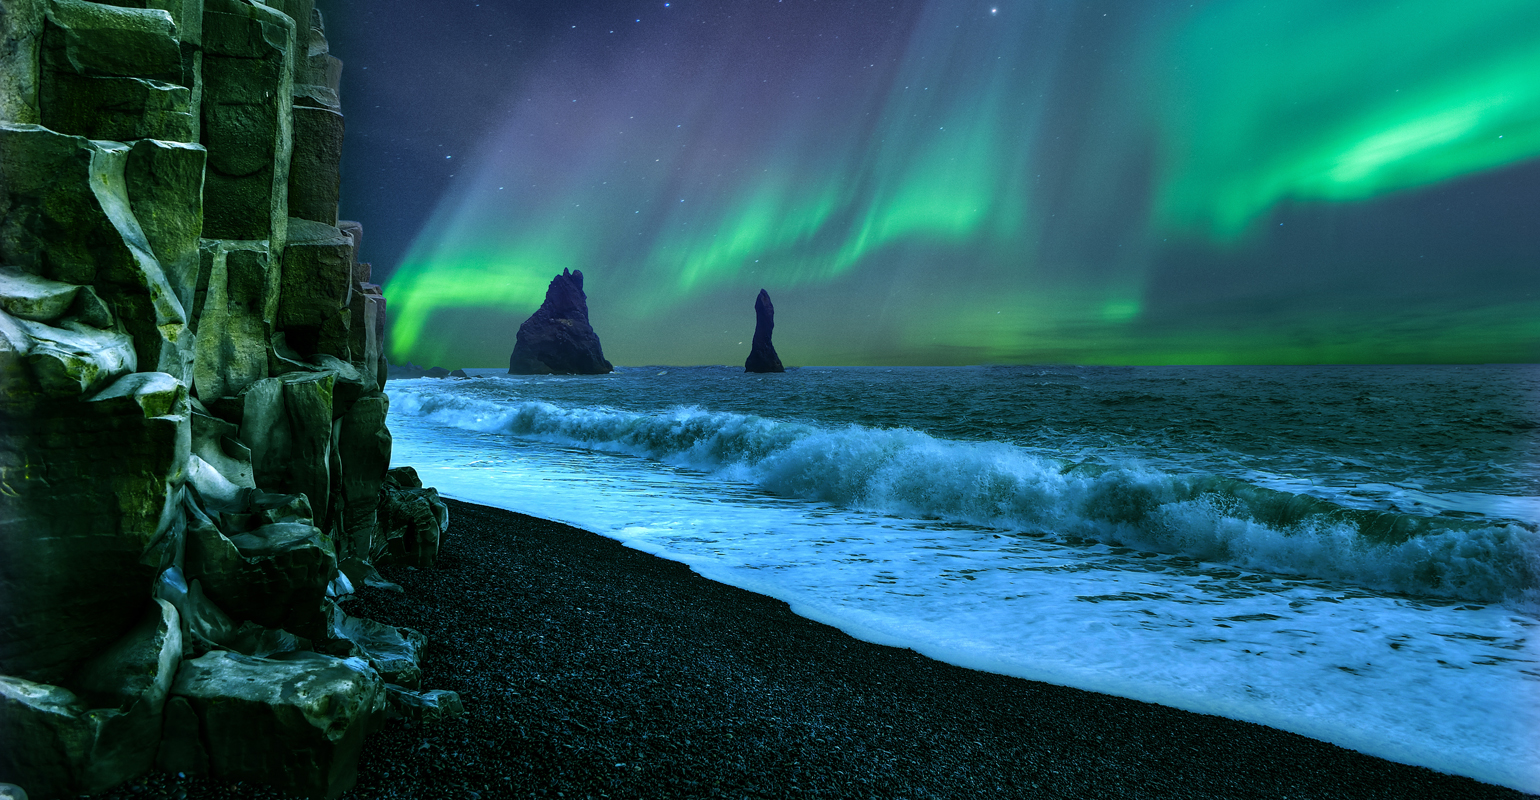 Iceland in Winter - Northern Lights